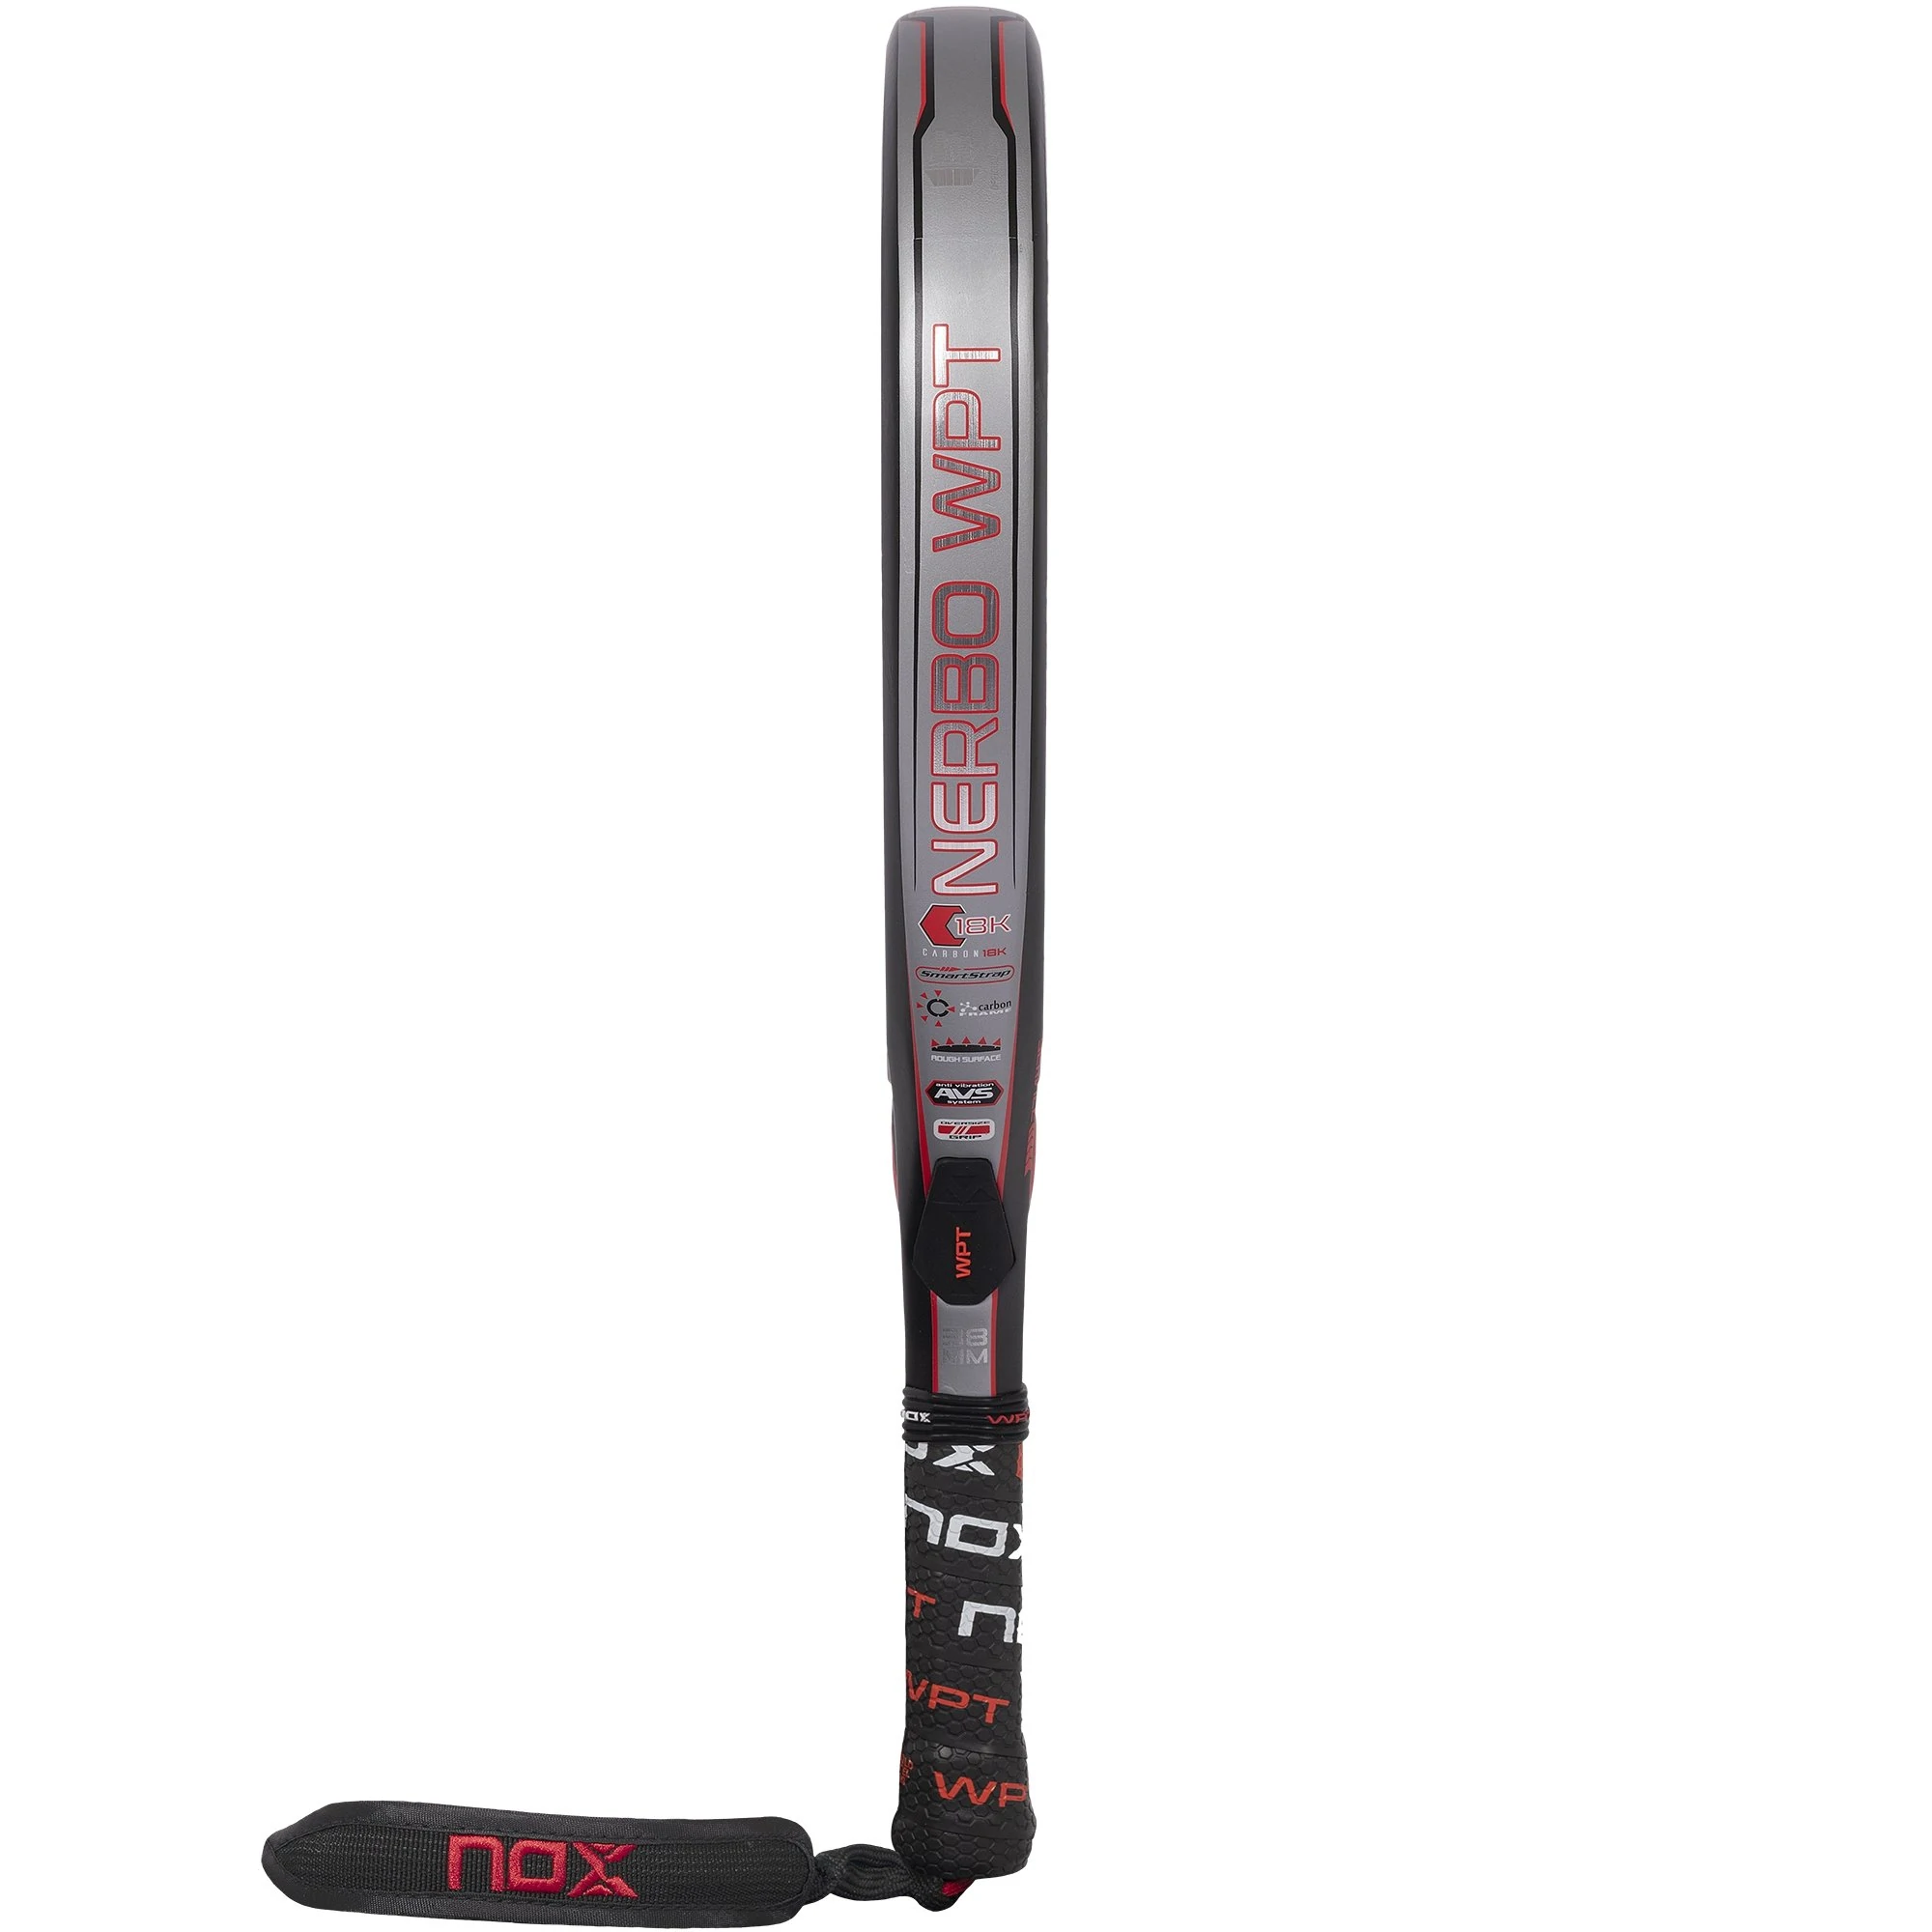 NERBO World Padel Tour Official Racket 2022